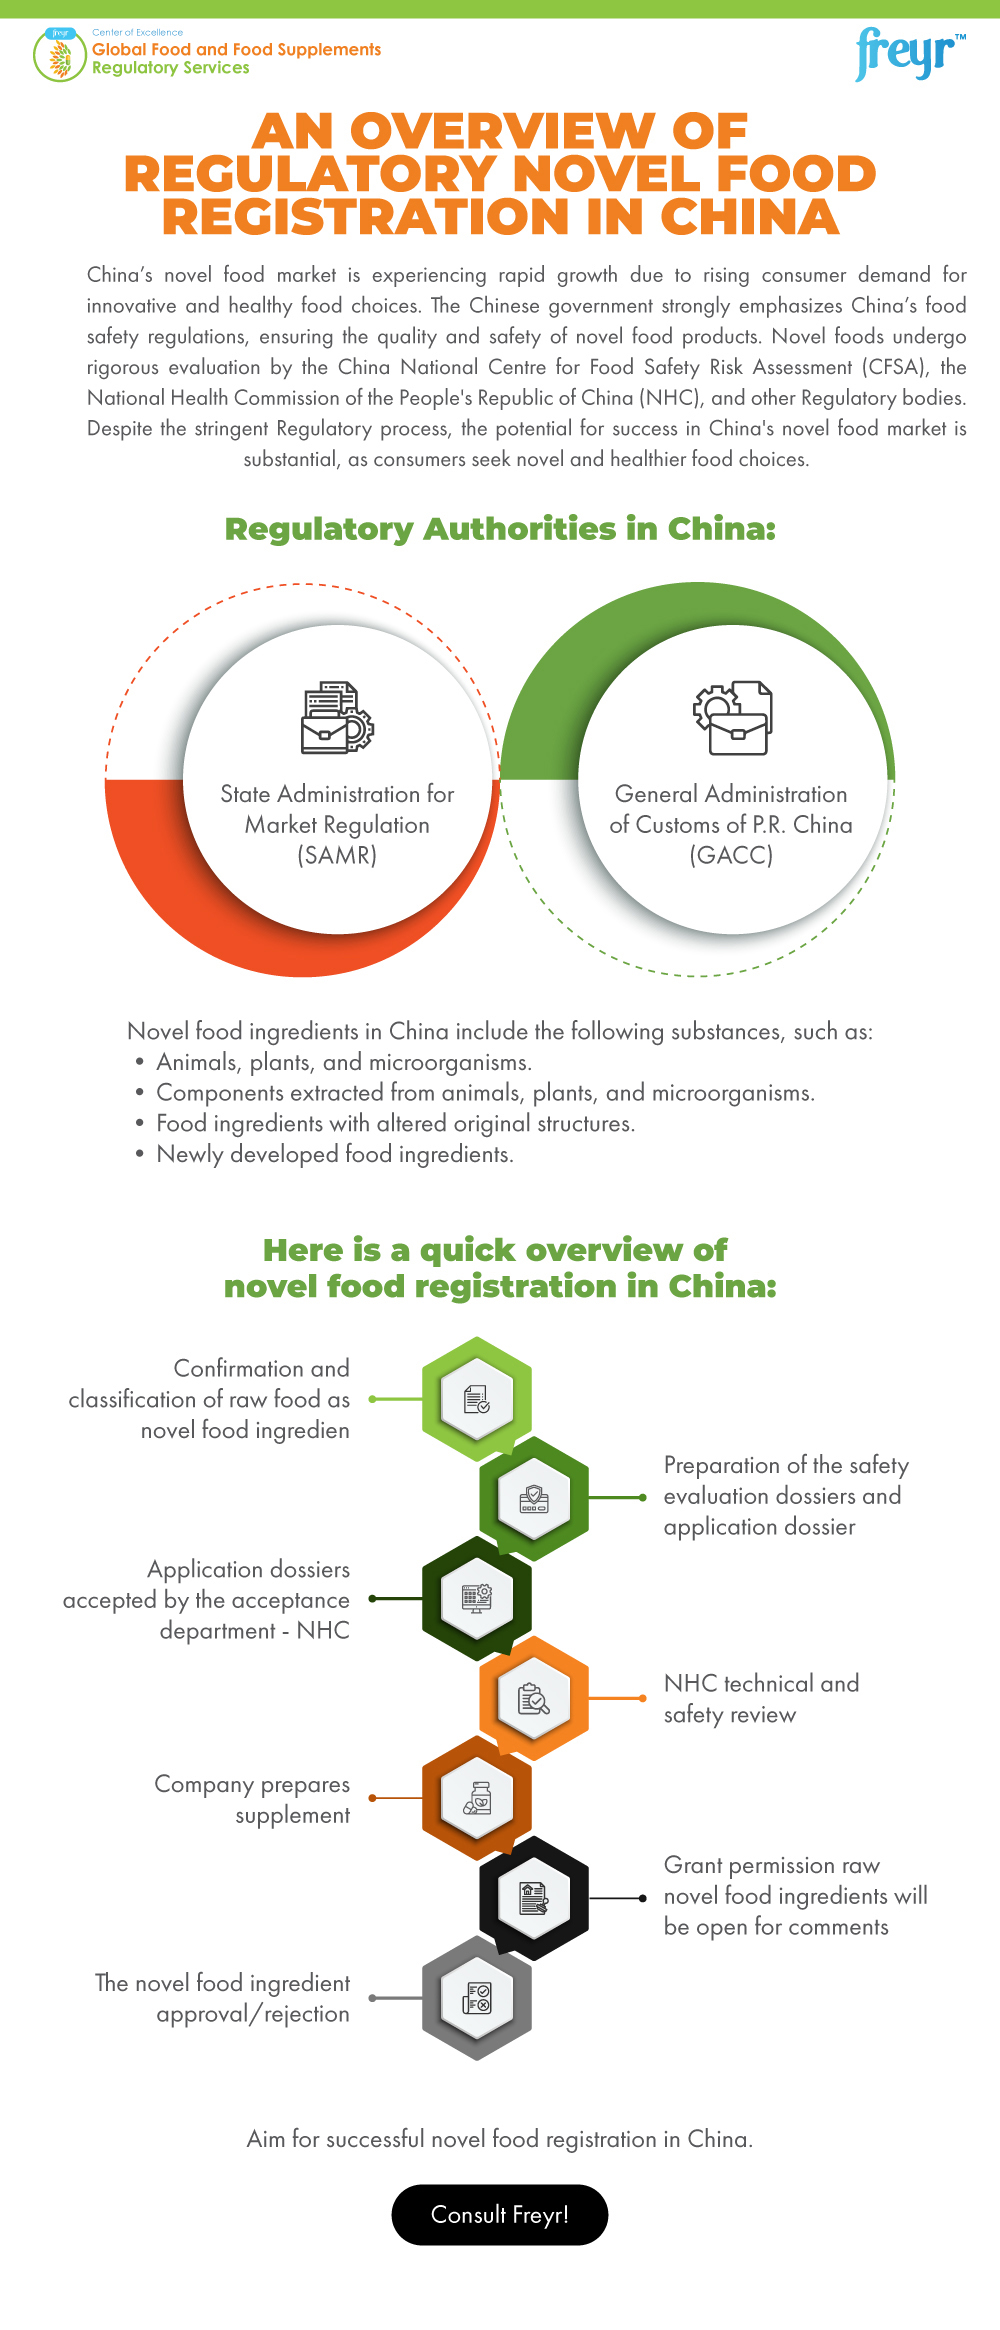 An Overview of Regulatory Novel Food Registration in China